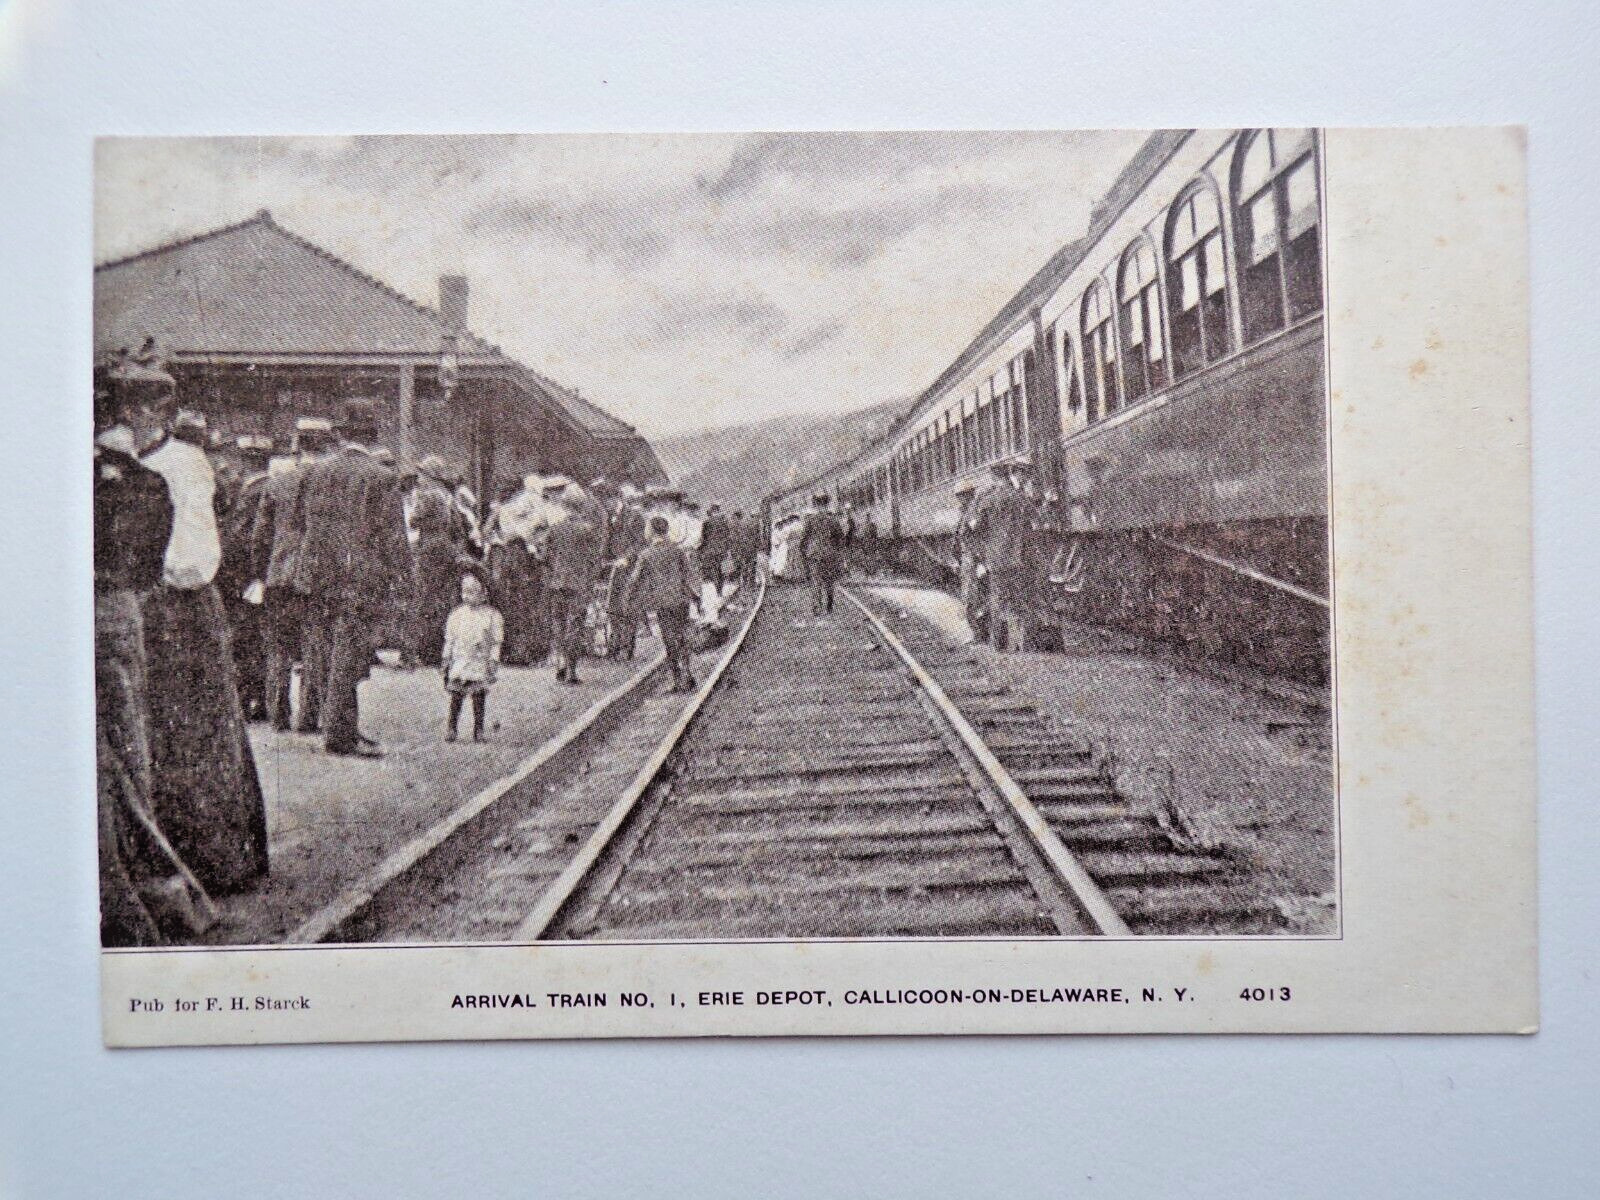 Rare 1900s TRAIN ARRIVAL NO. 1 ERIE DEPOT CALLICOON-ON-DELAWARE N.Y.